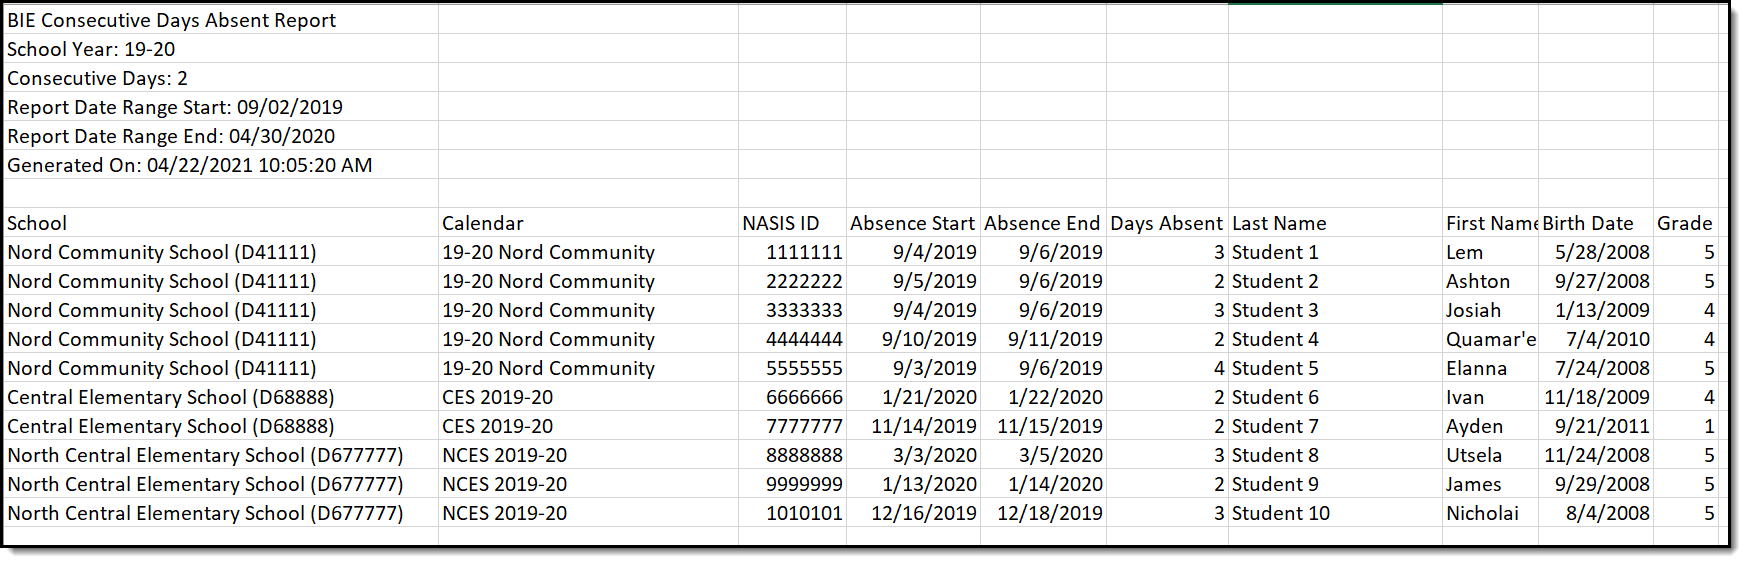 Screenshot of an example of the BIE Consecutive Days Absent Report in CSV format.